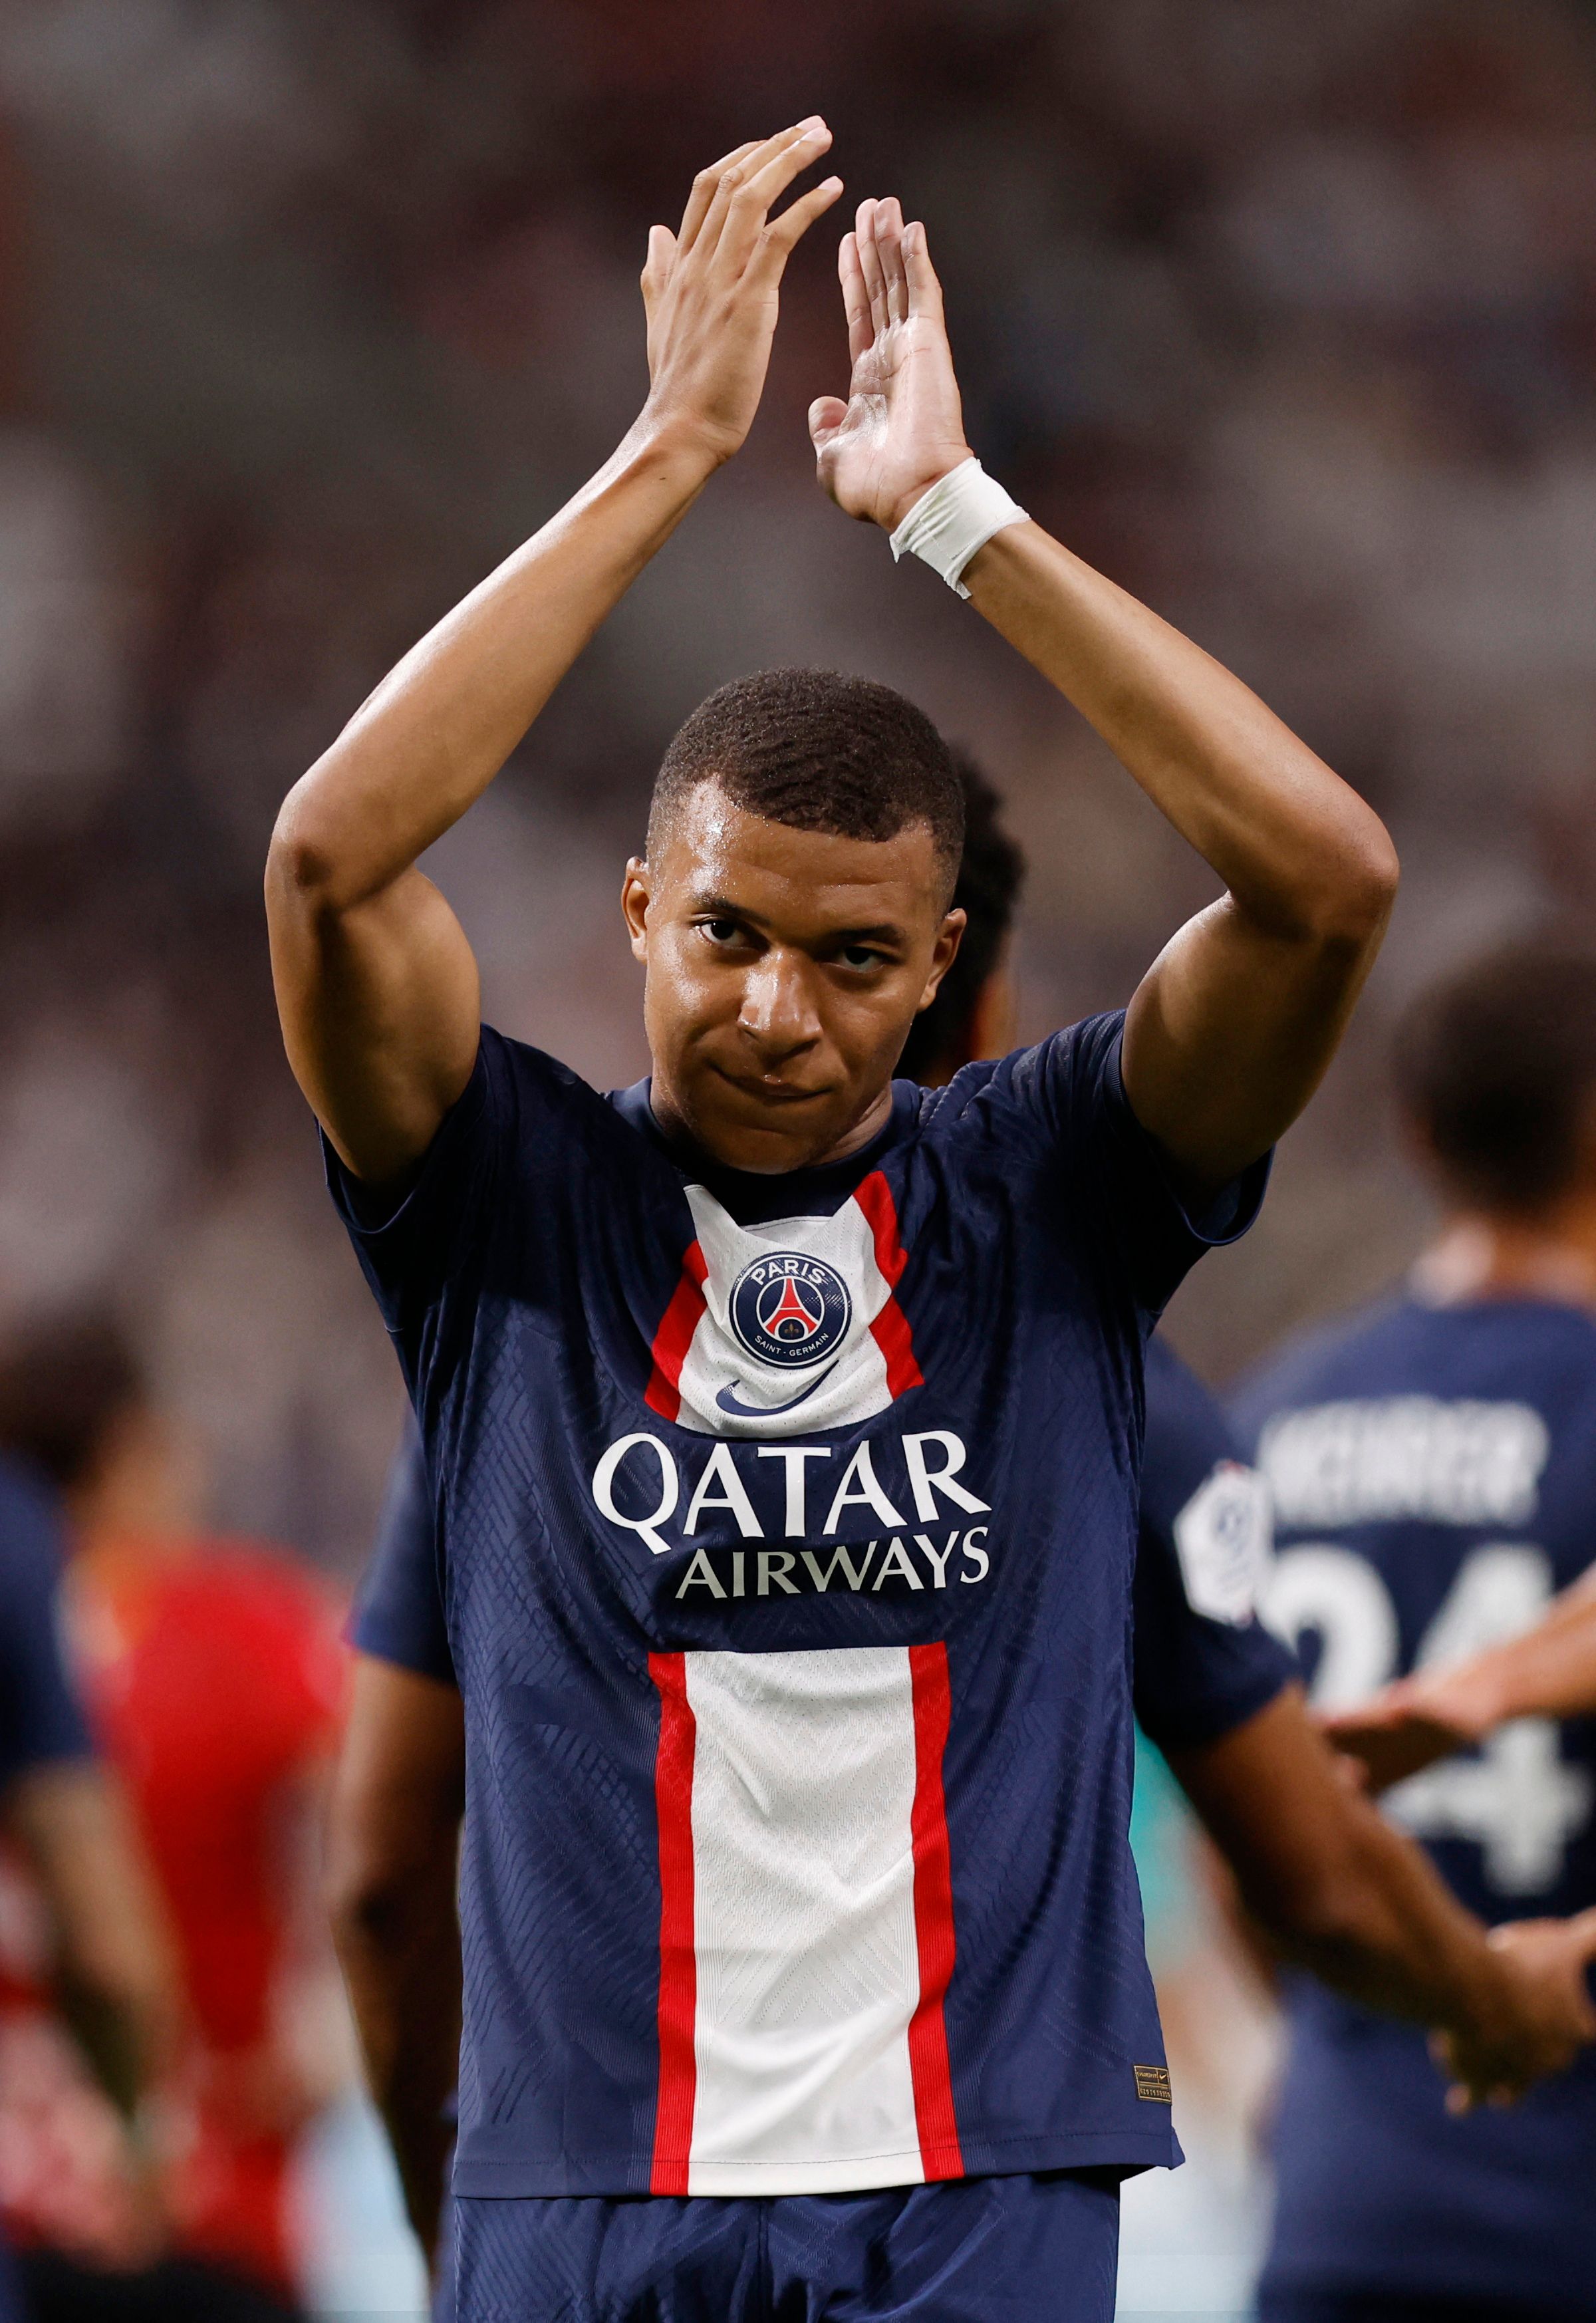 PSG's Mbappe clapping.